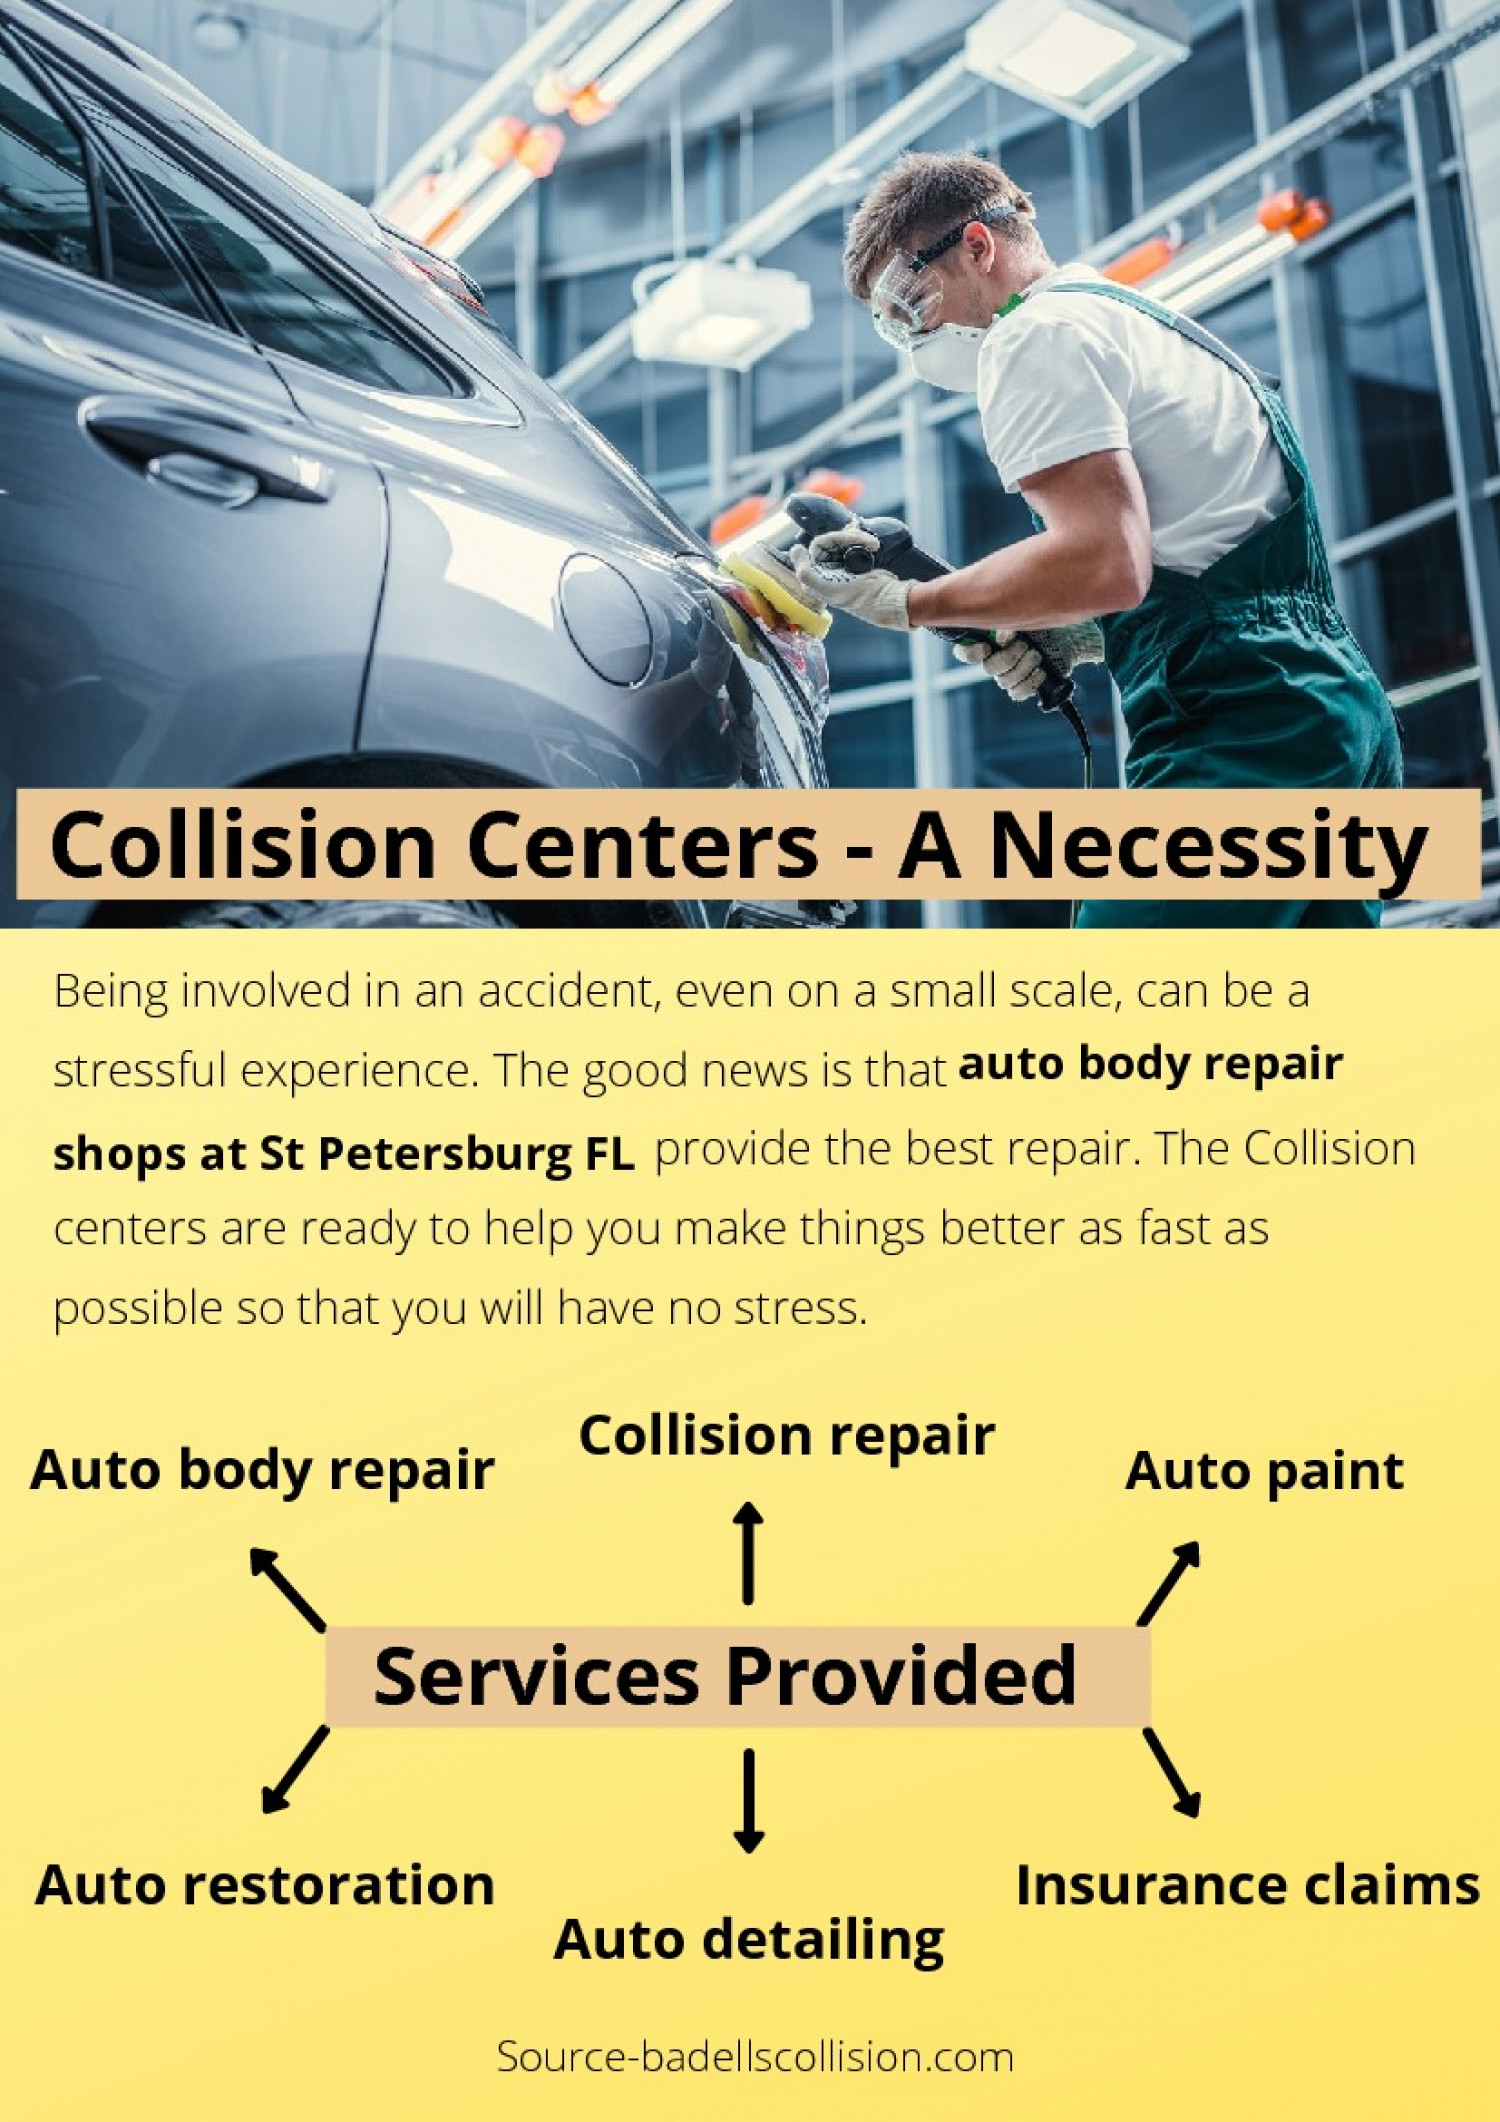 Collision Centers- A Necessity Infographic